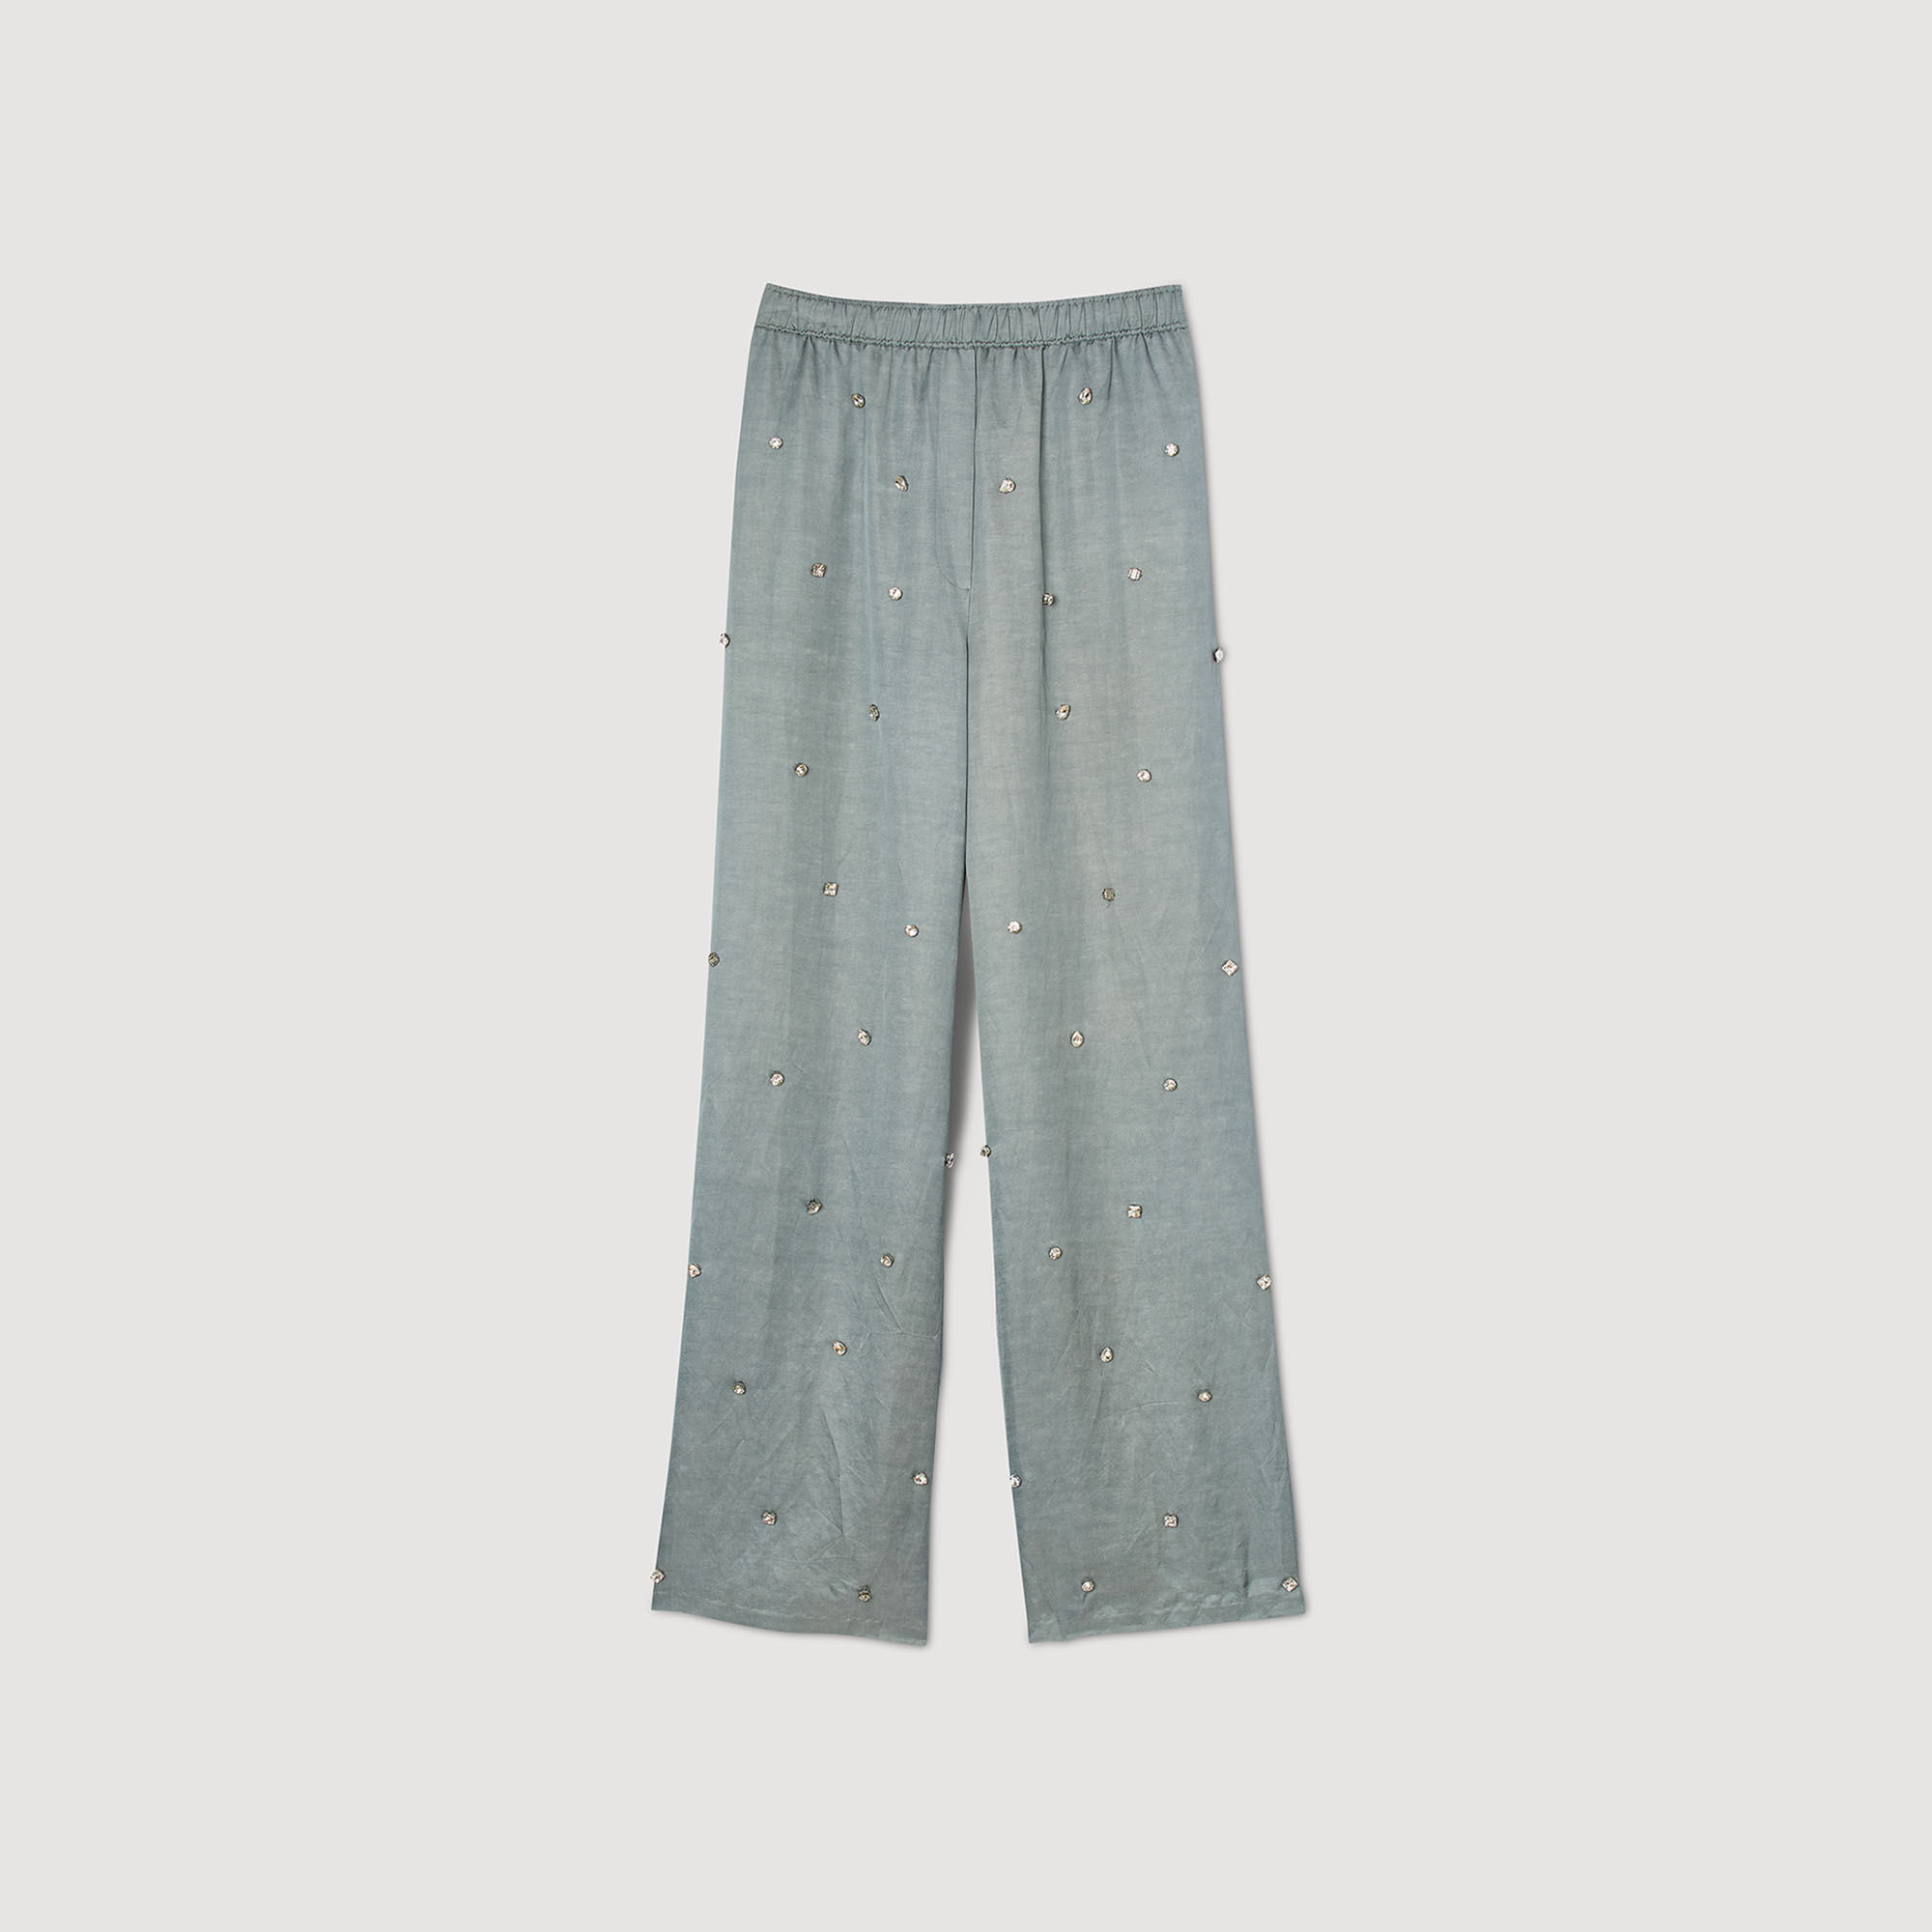 Trousers from Masai | Slim-fit, wide leg, kick flare - find your perfect fit